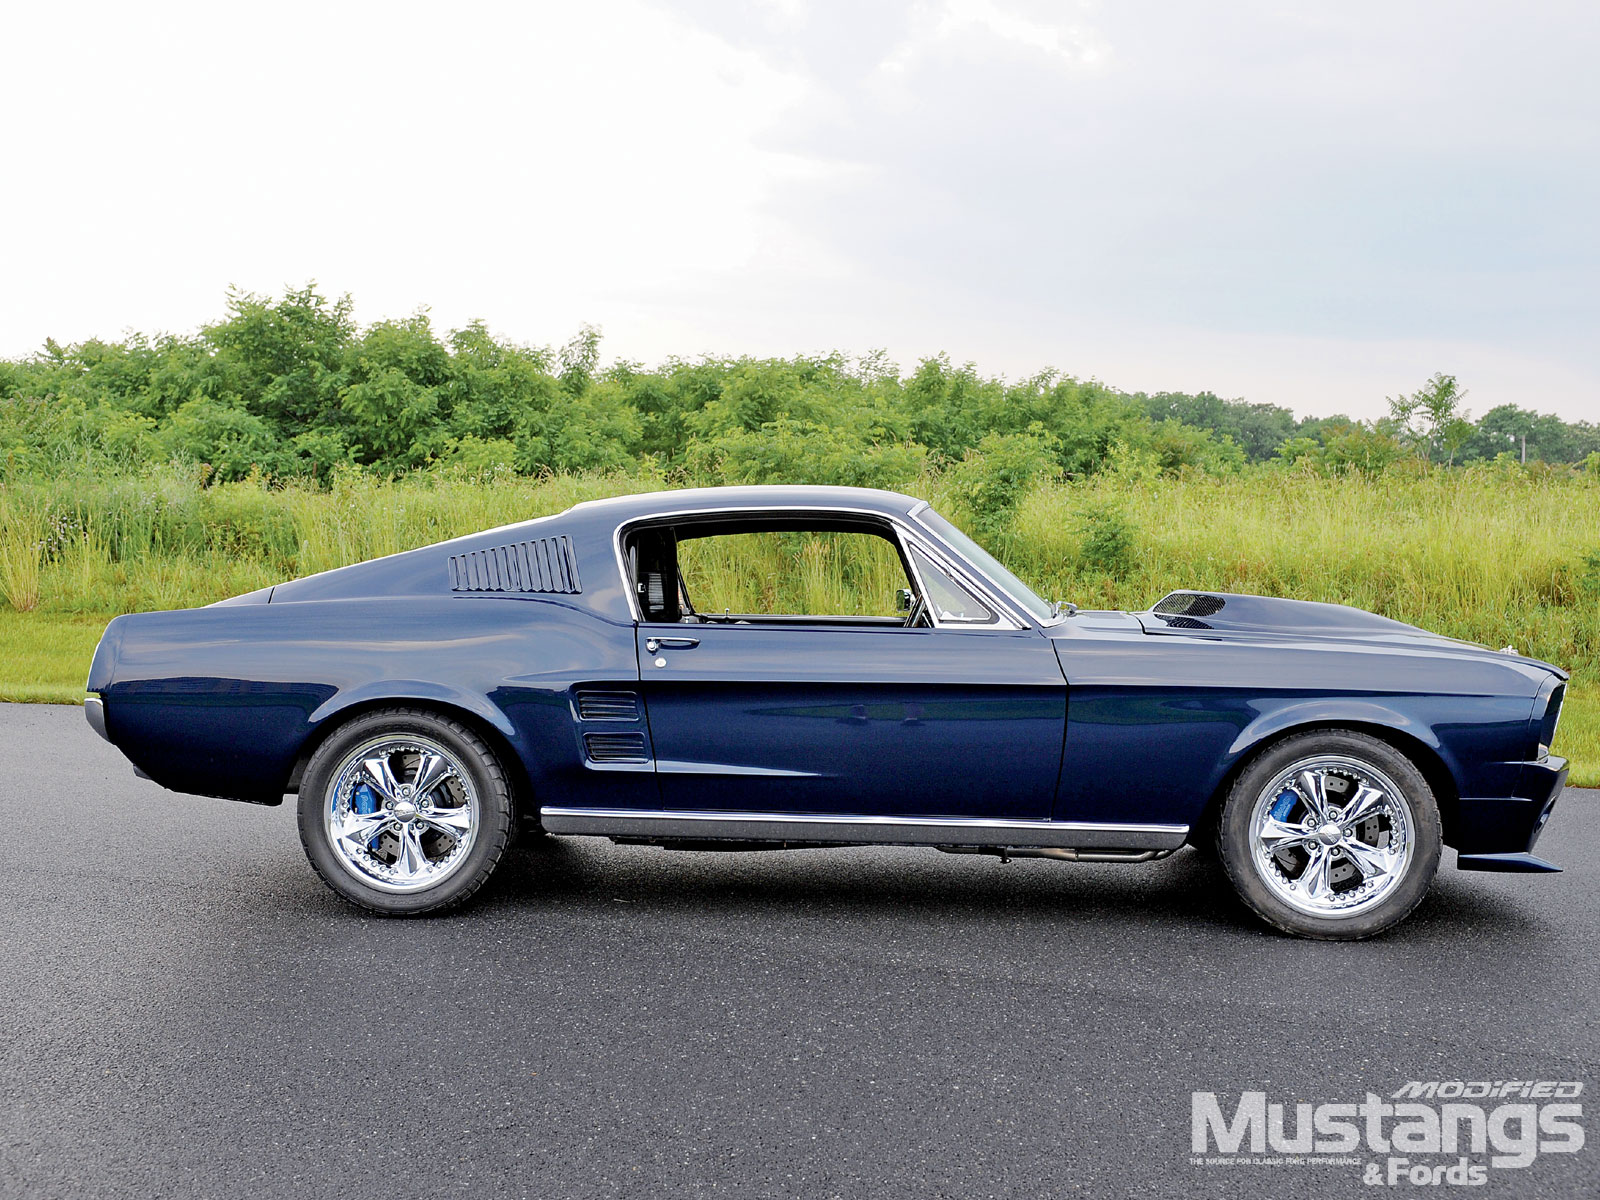 Types of ford mustangs are there #4